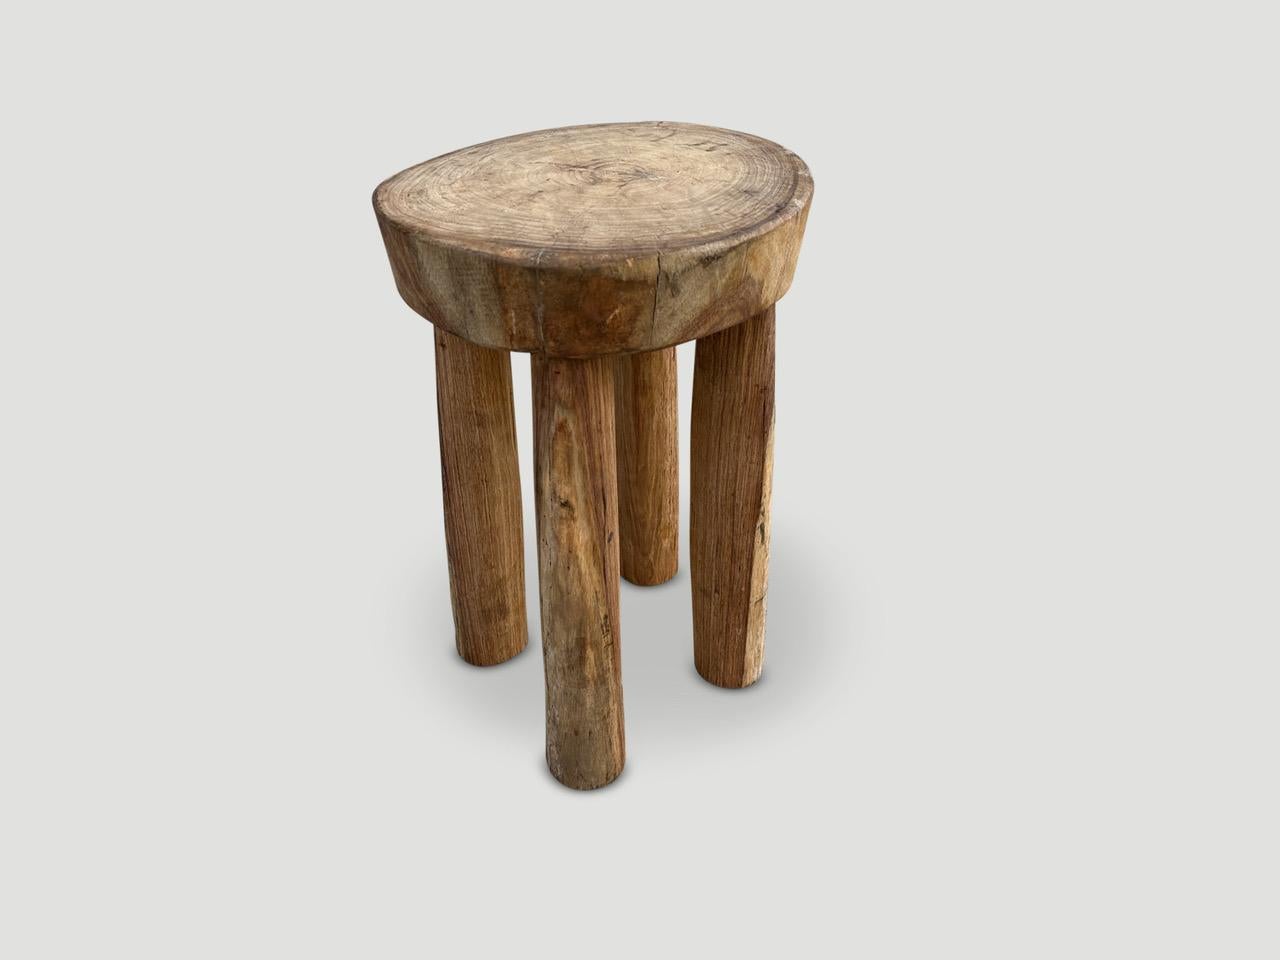 Beautiful antique side table or stool hand carved by the Senufo tribes from a single block of mahogany wood native to the west coast of Africa. The wood is tough, dense and very durable. The light tone wood is unusual as they are mostly darker.